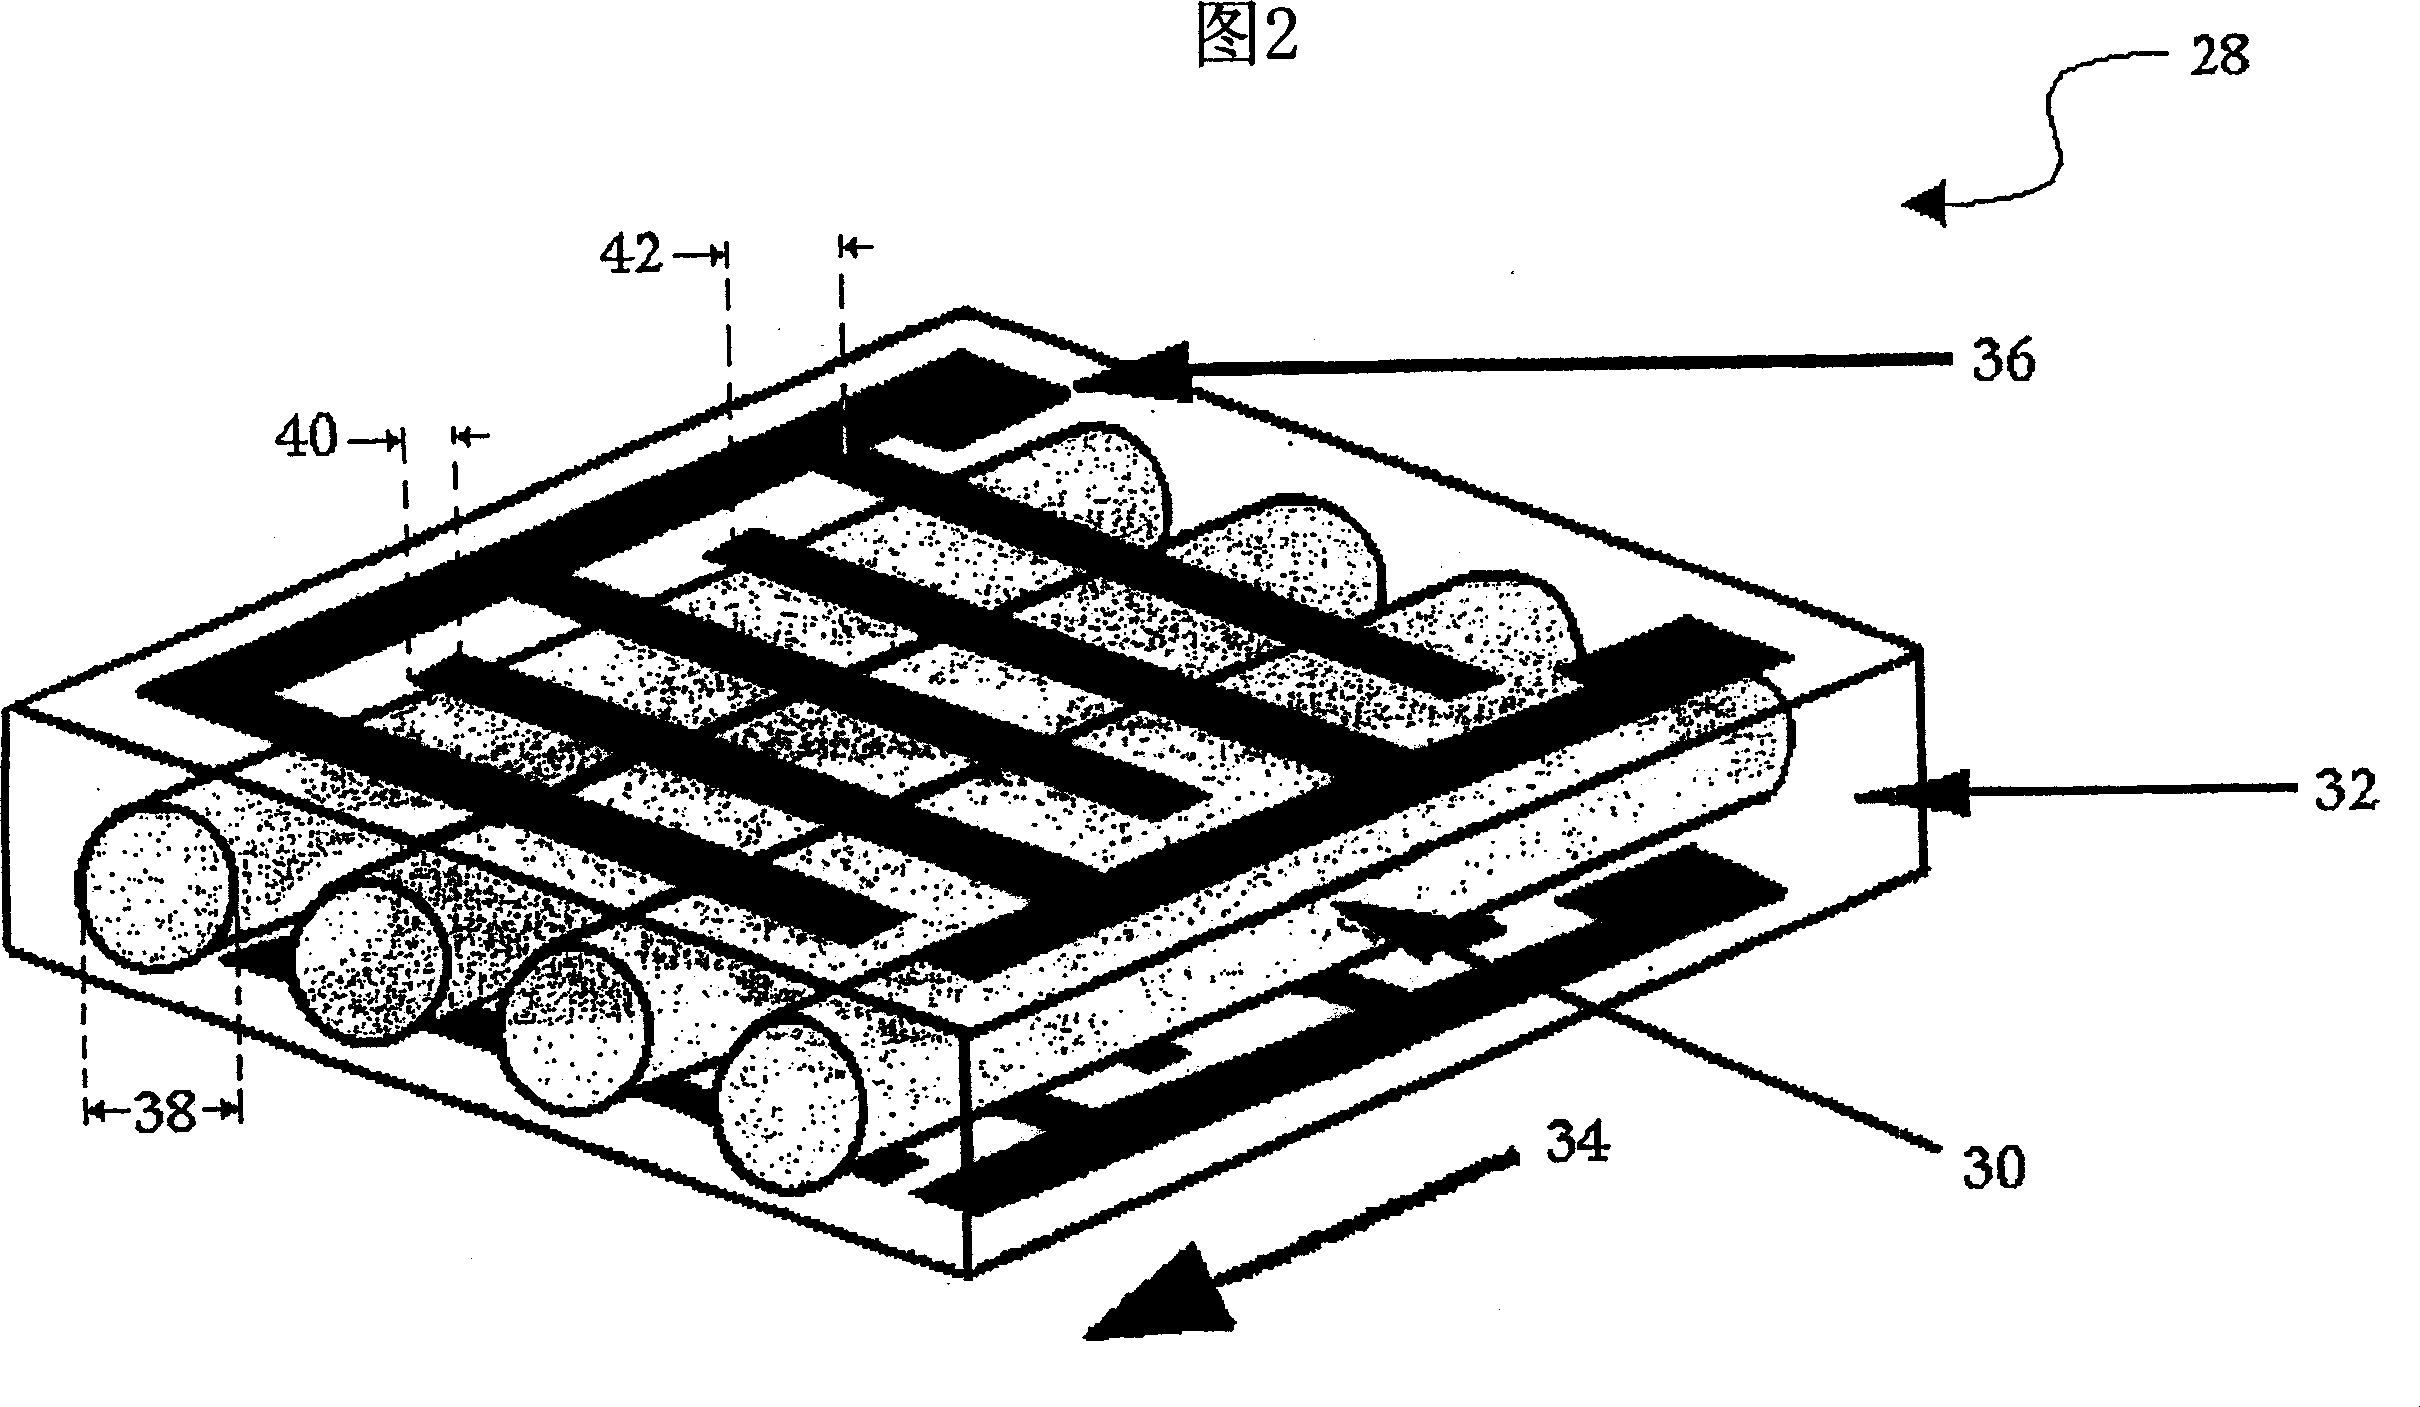 System for generating electric power from a rotating tire's mechanical energy using reinforced piezoelectric materials